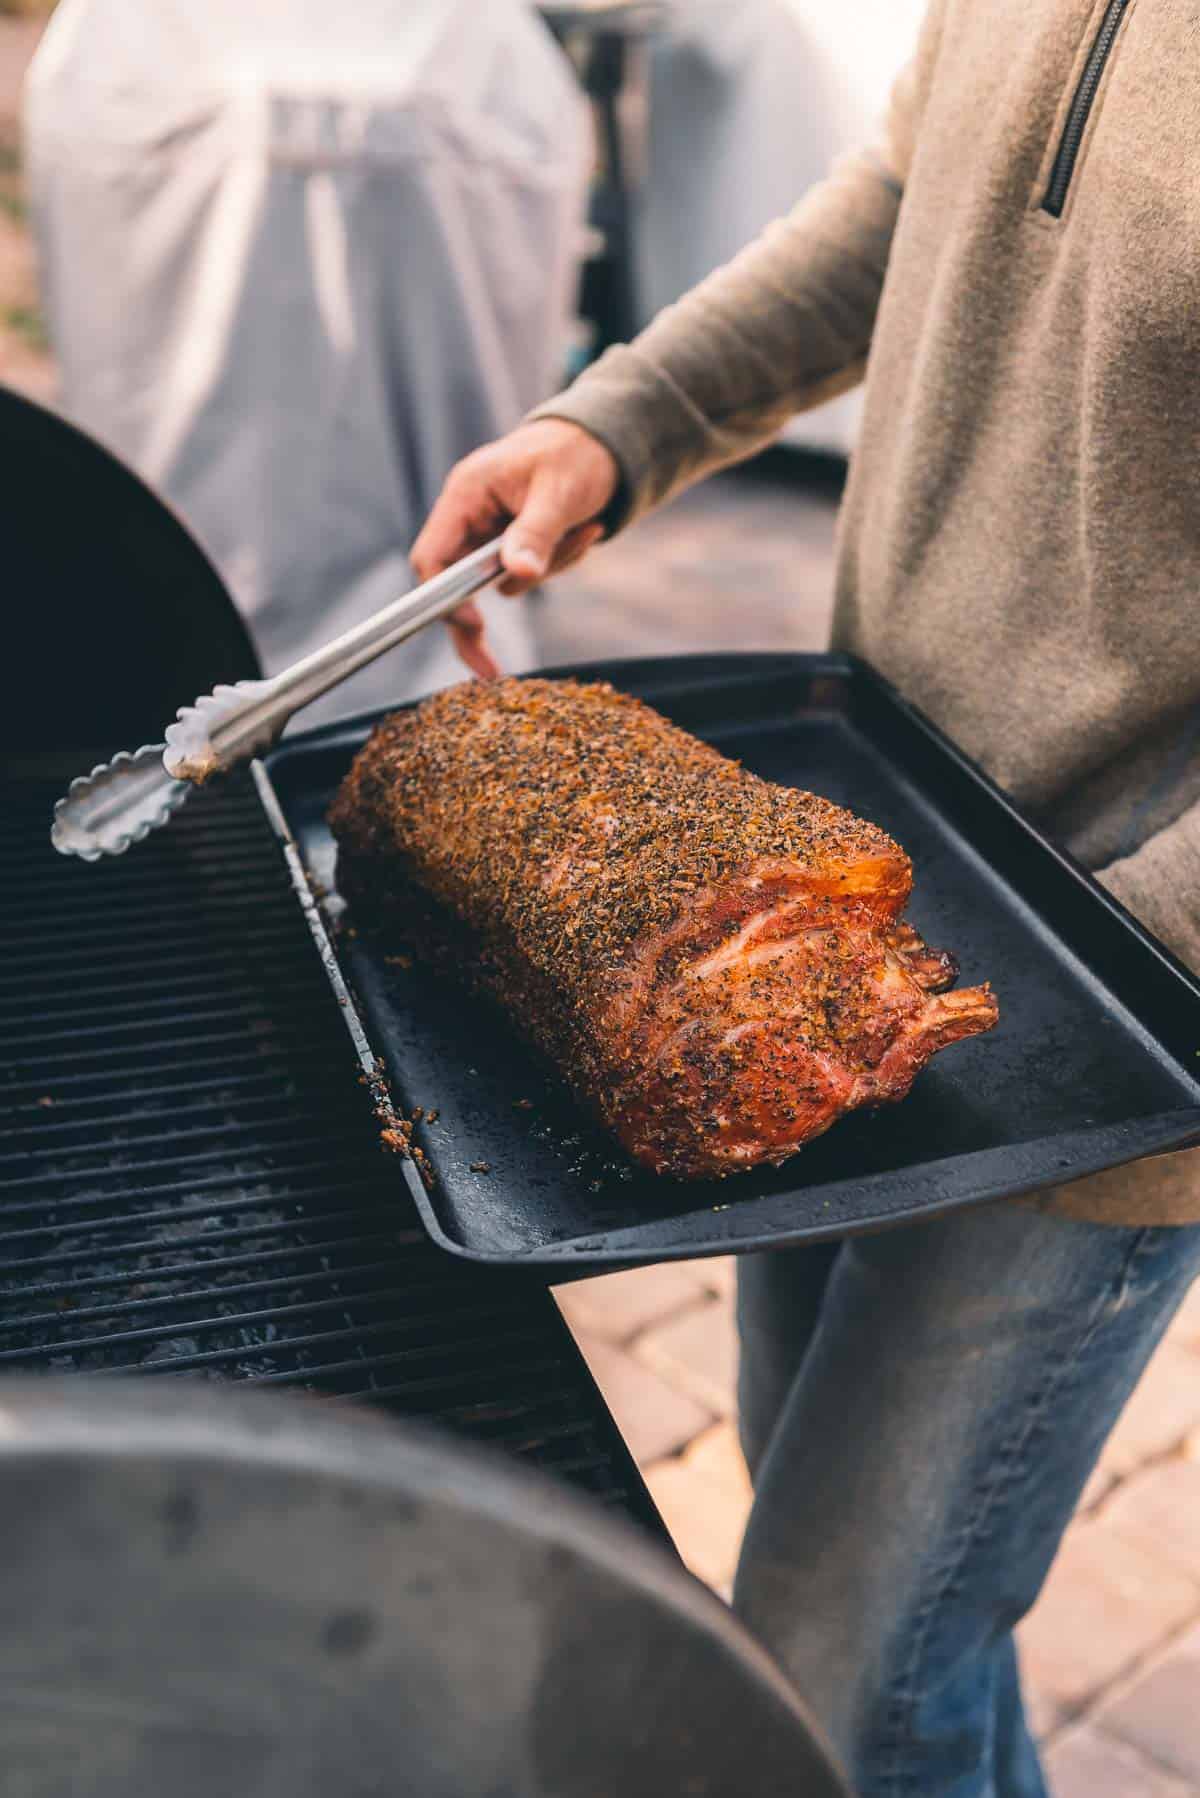 A man is holding a smoked rack of pork on a tray.